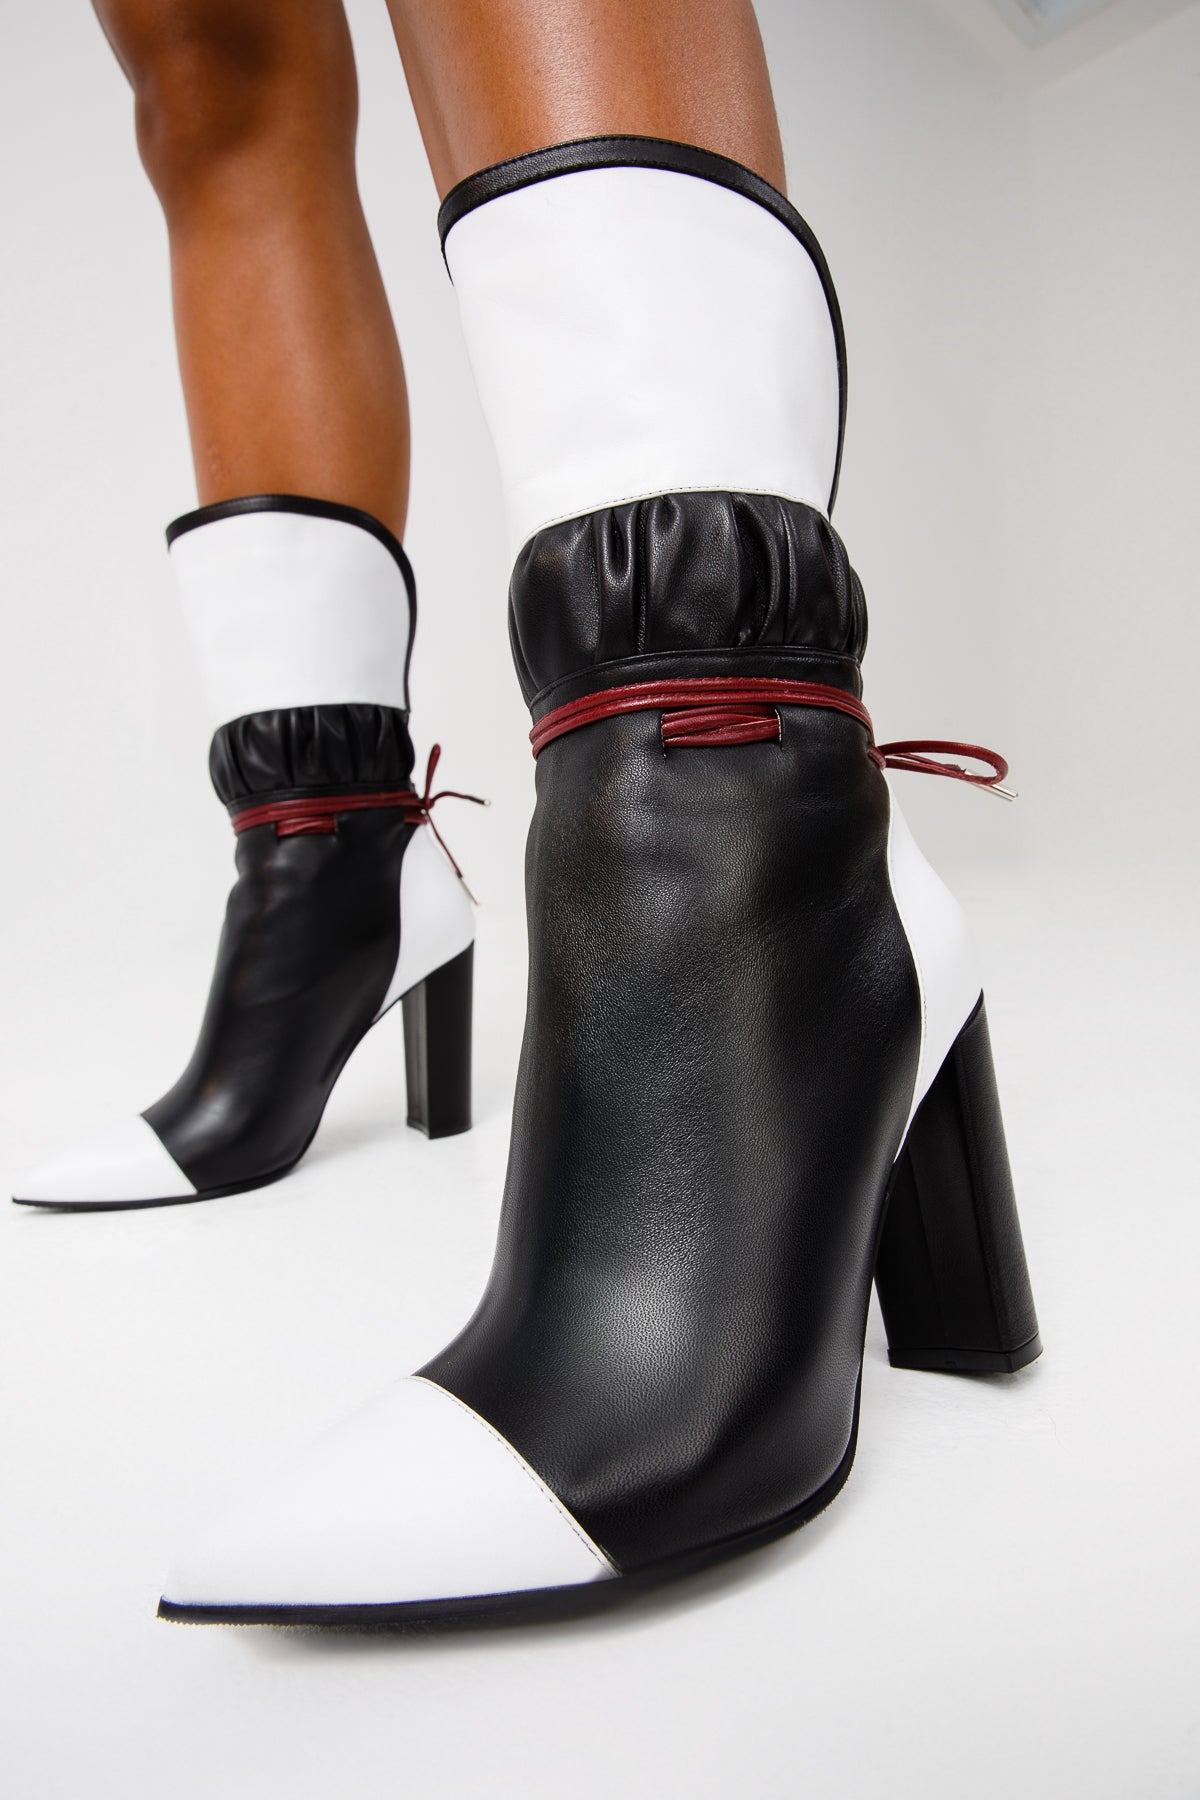 – Black Women Limited Calf White Boot Heel Mid The & Leather Shoes Leather Lucca Vinci High